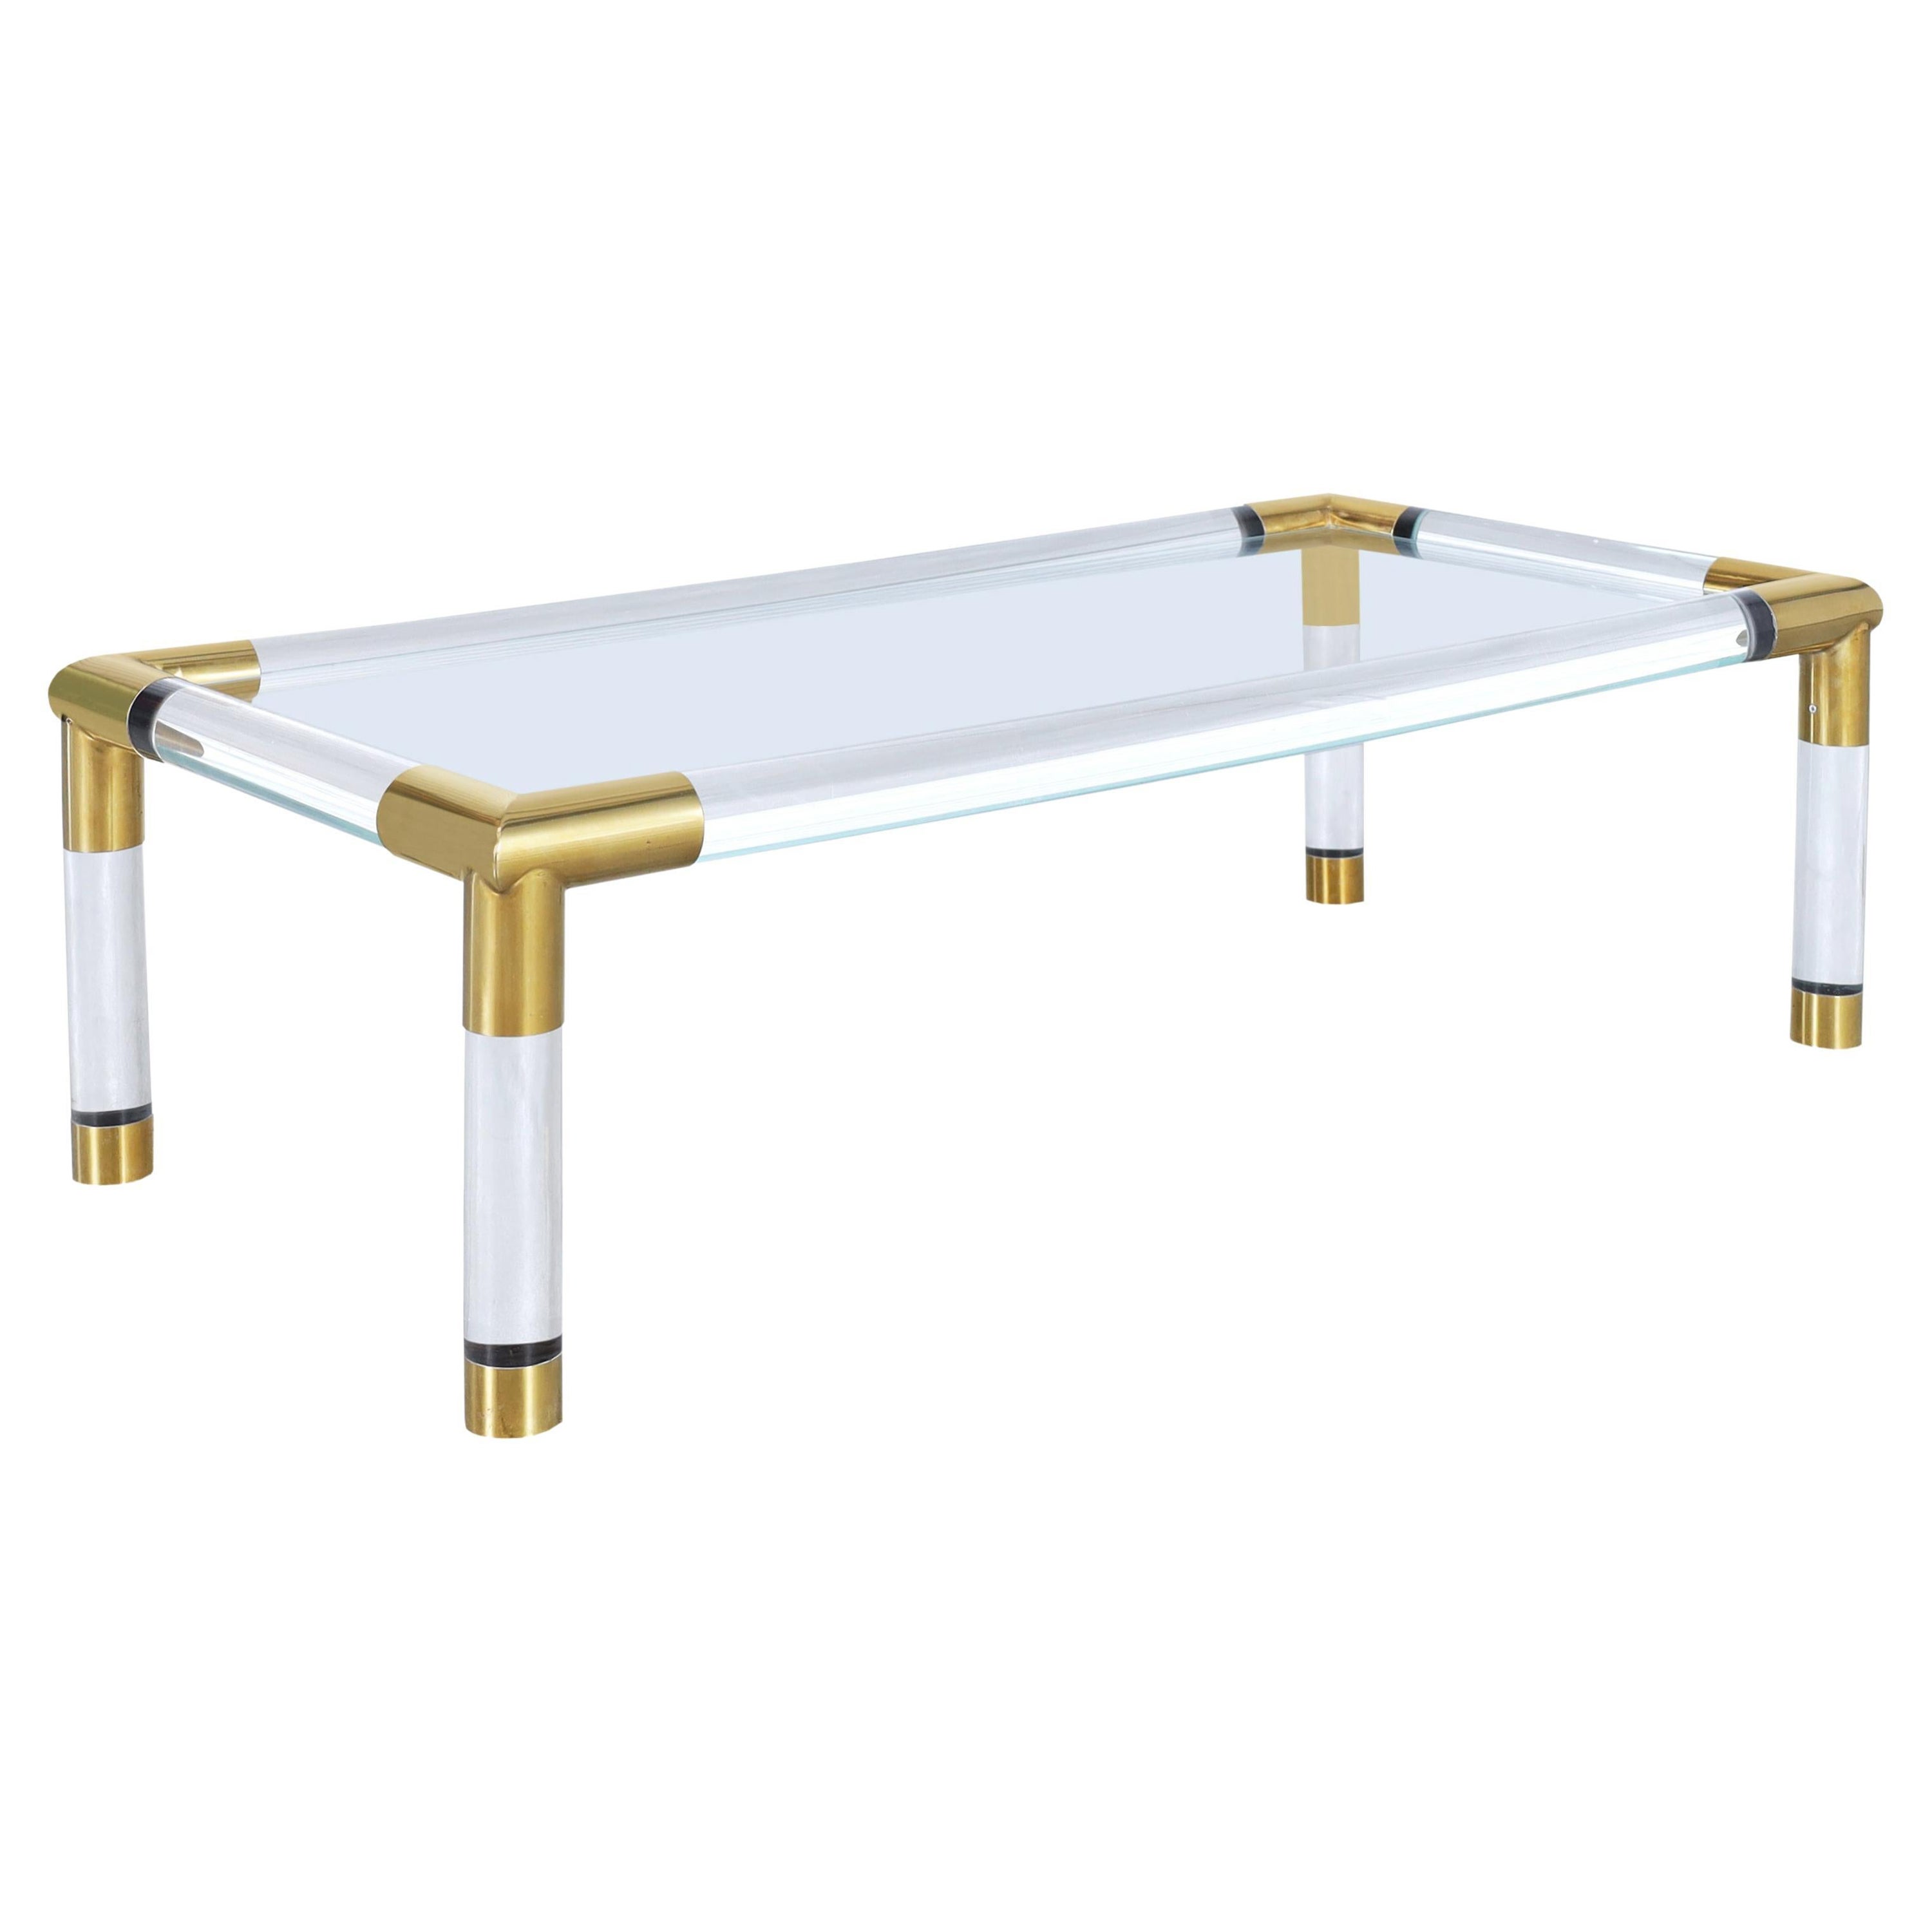 Italian Modernist Brass and Lucite Coffee Table For Sale